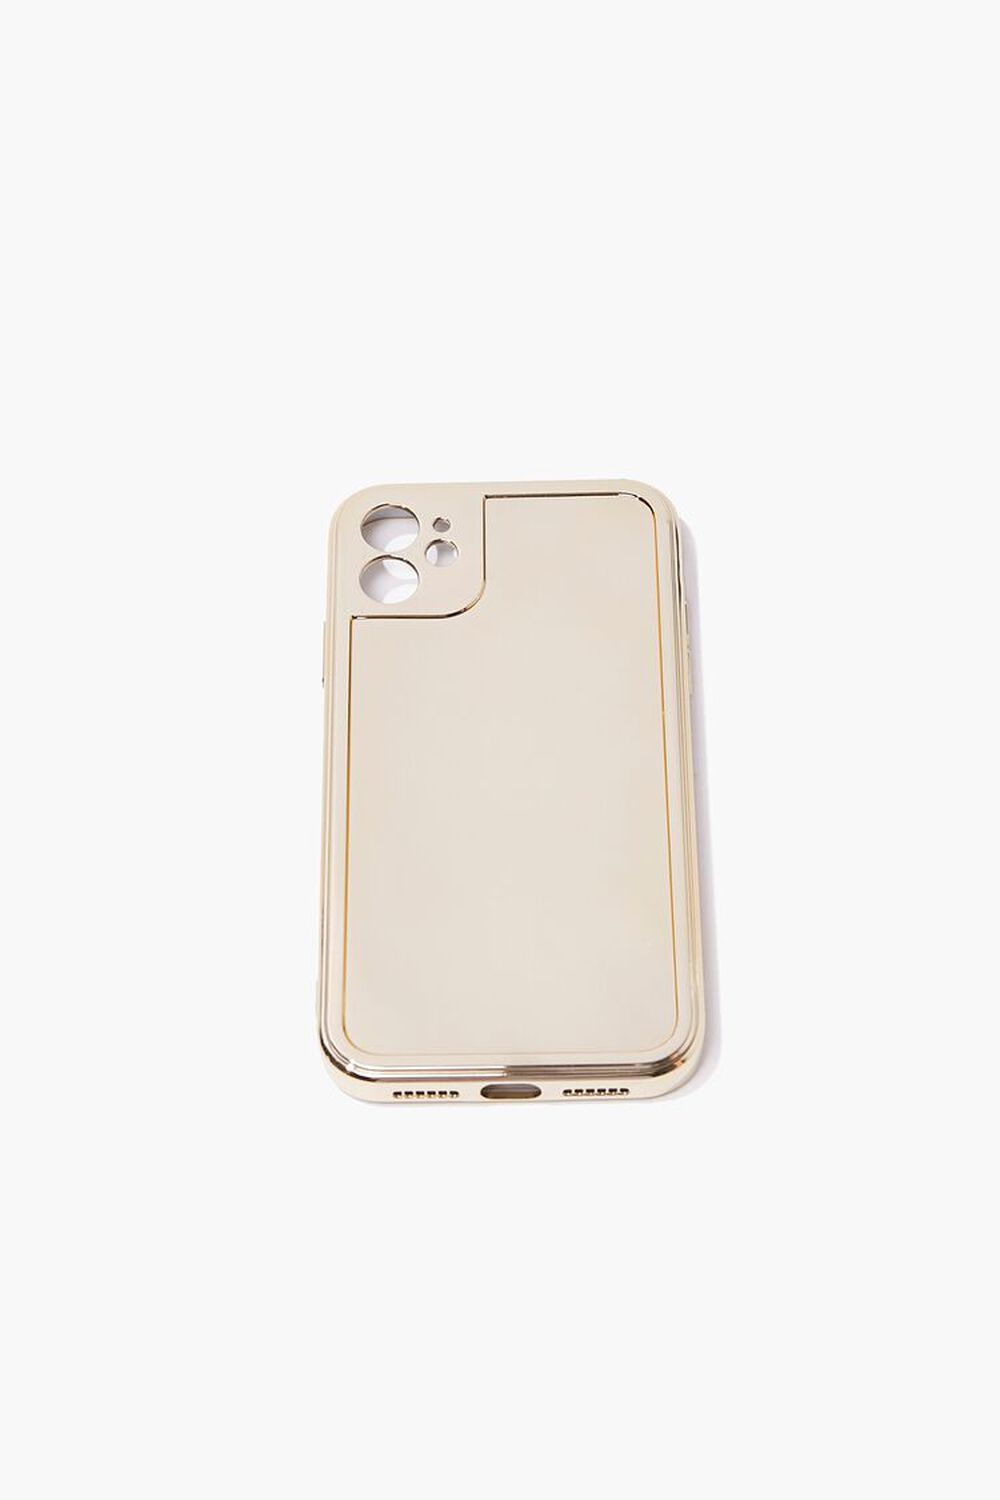 GOLD Mirrored Metallic Phone Case for iPhone 11, image 1